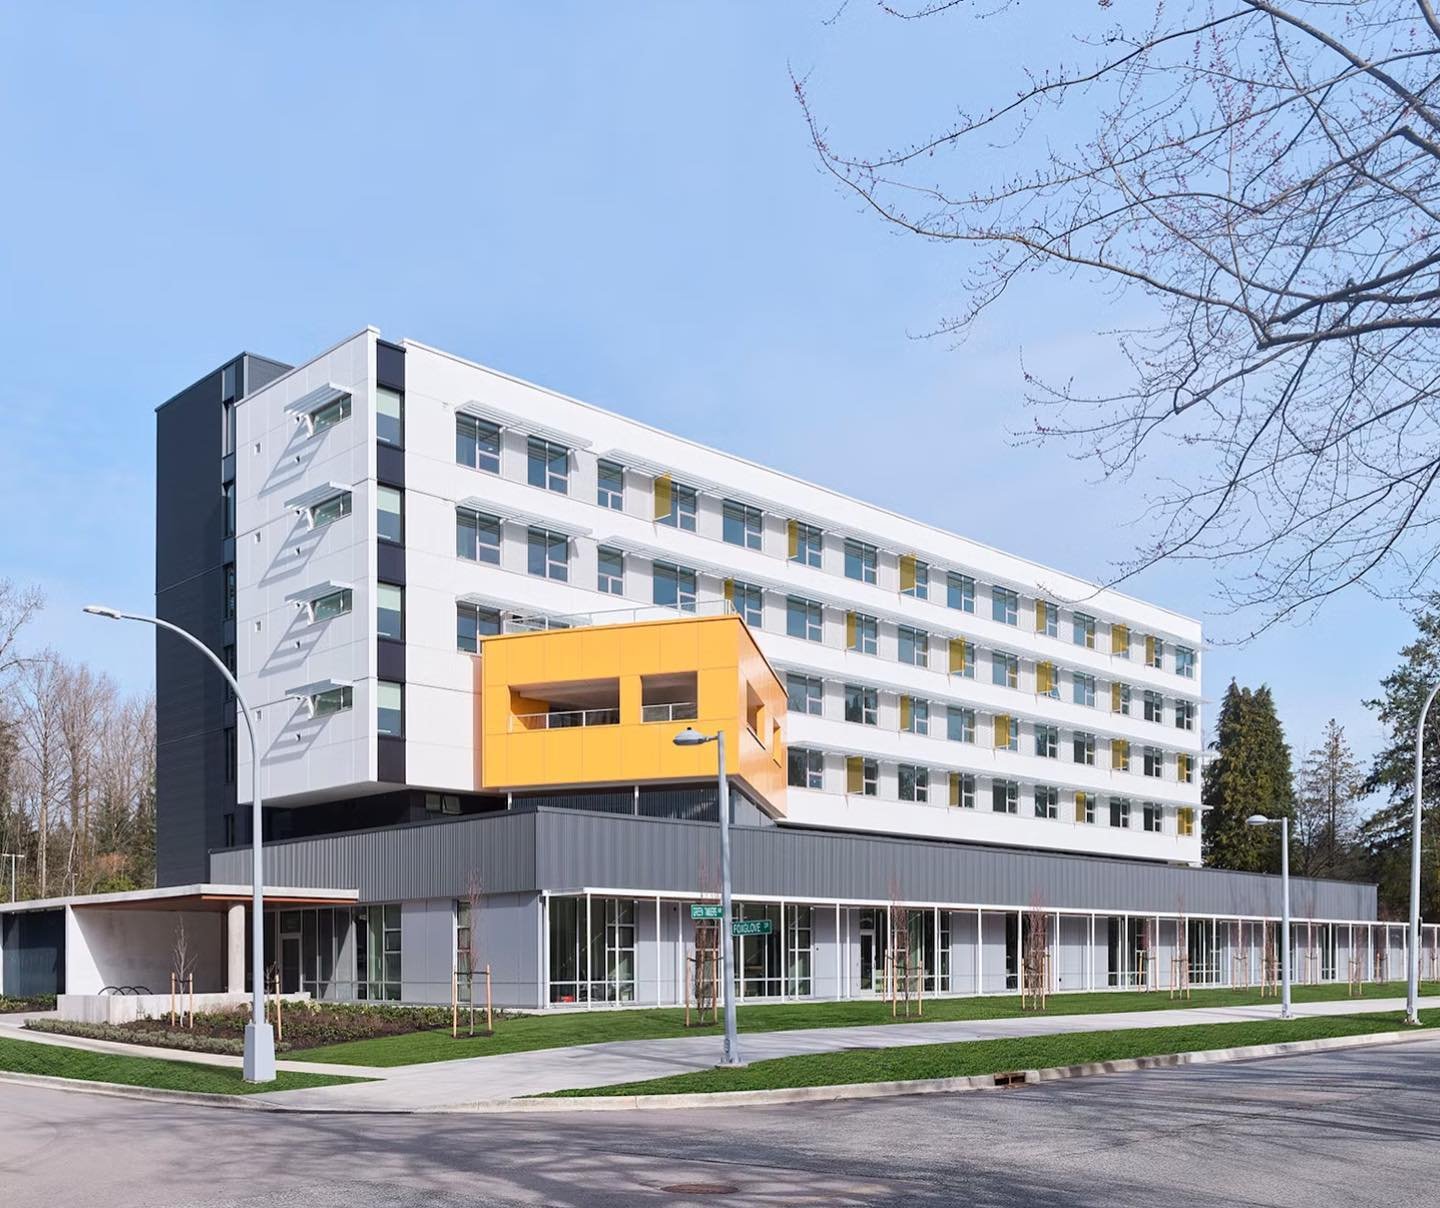 Congratulations to @nsdaarchitects and the design team for the recent win of the Canadian Green Building Award for Residential (Large) from SABMag for the RainCity Foxglove Shelter! This six-storey wood framed project provides shelter and temporary h